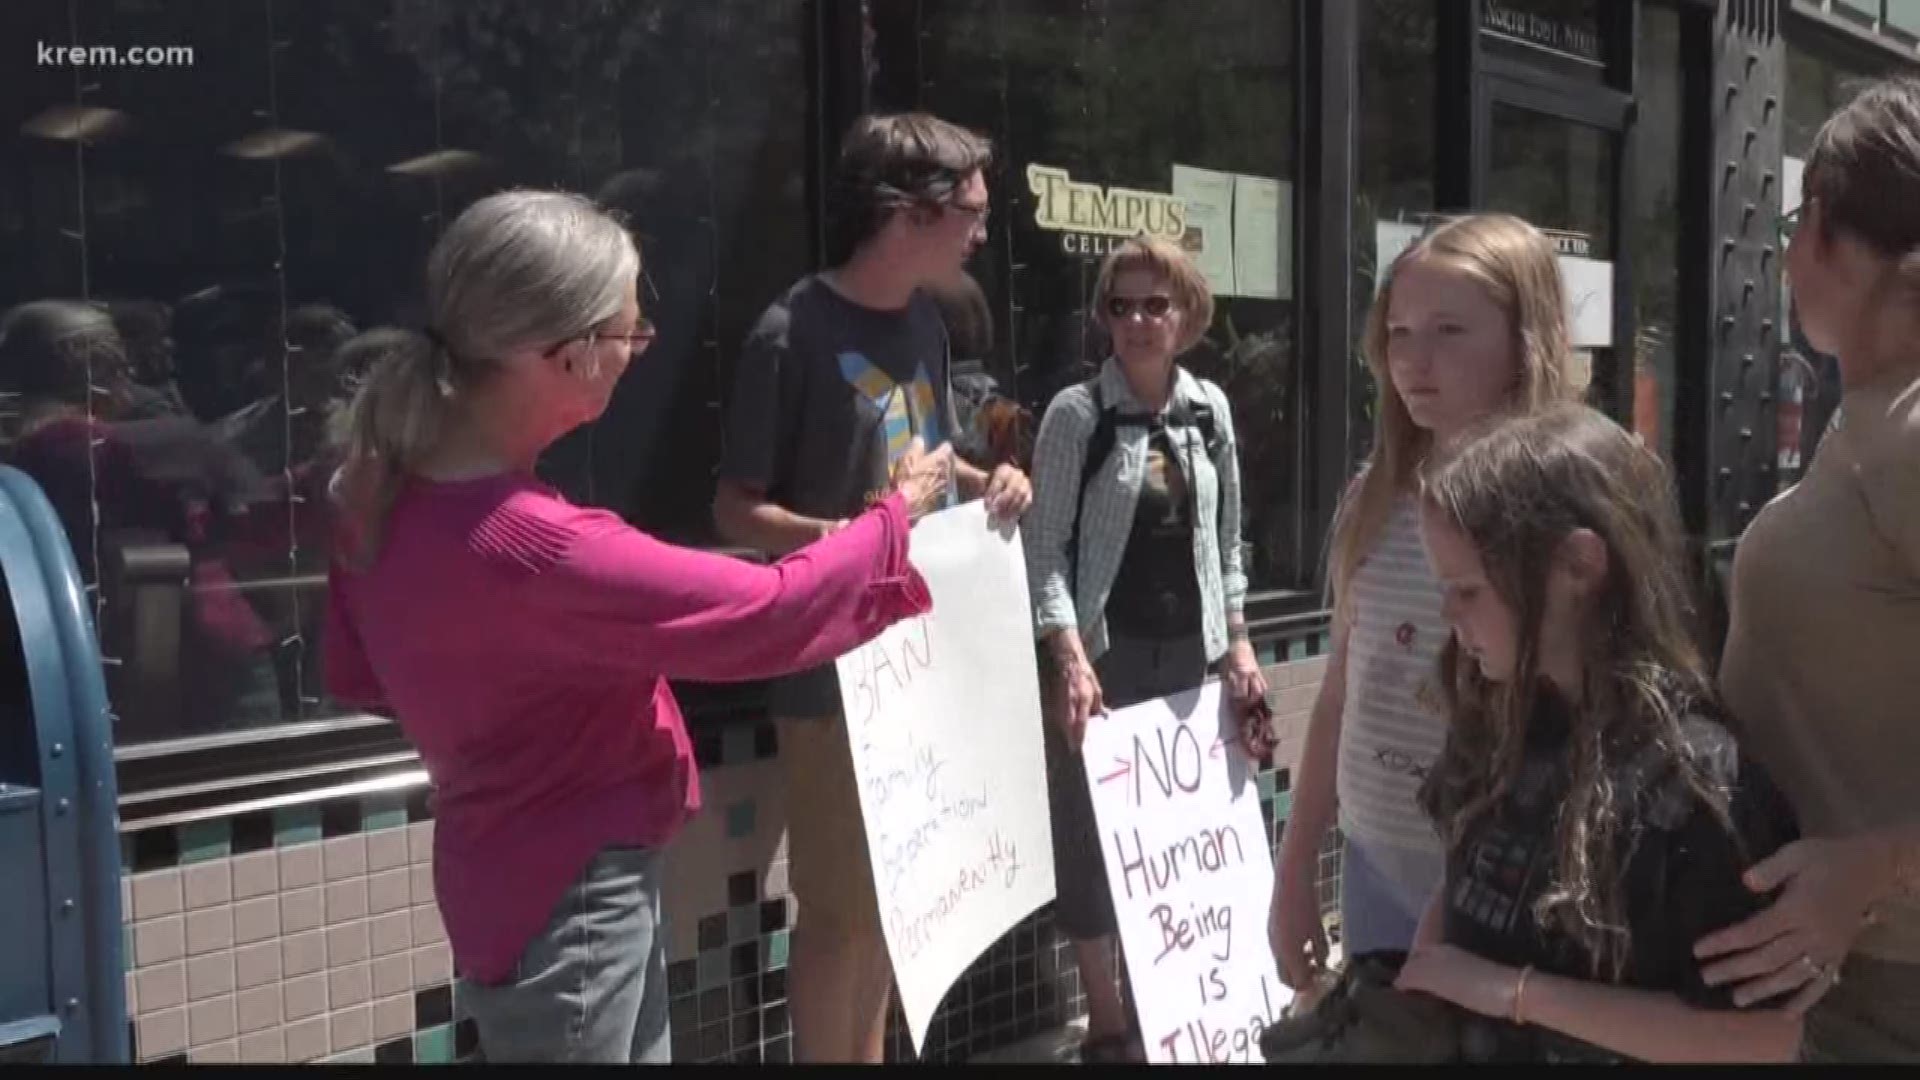 Demonstrators leave shoes at Cathy McMorris Rodgers' office to protest immigration policy